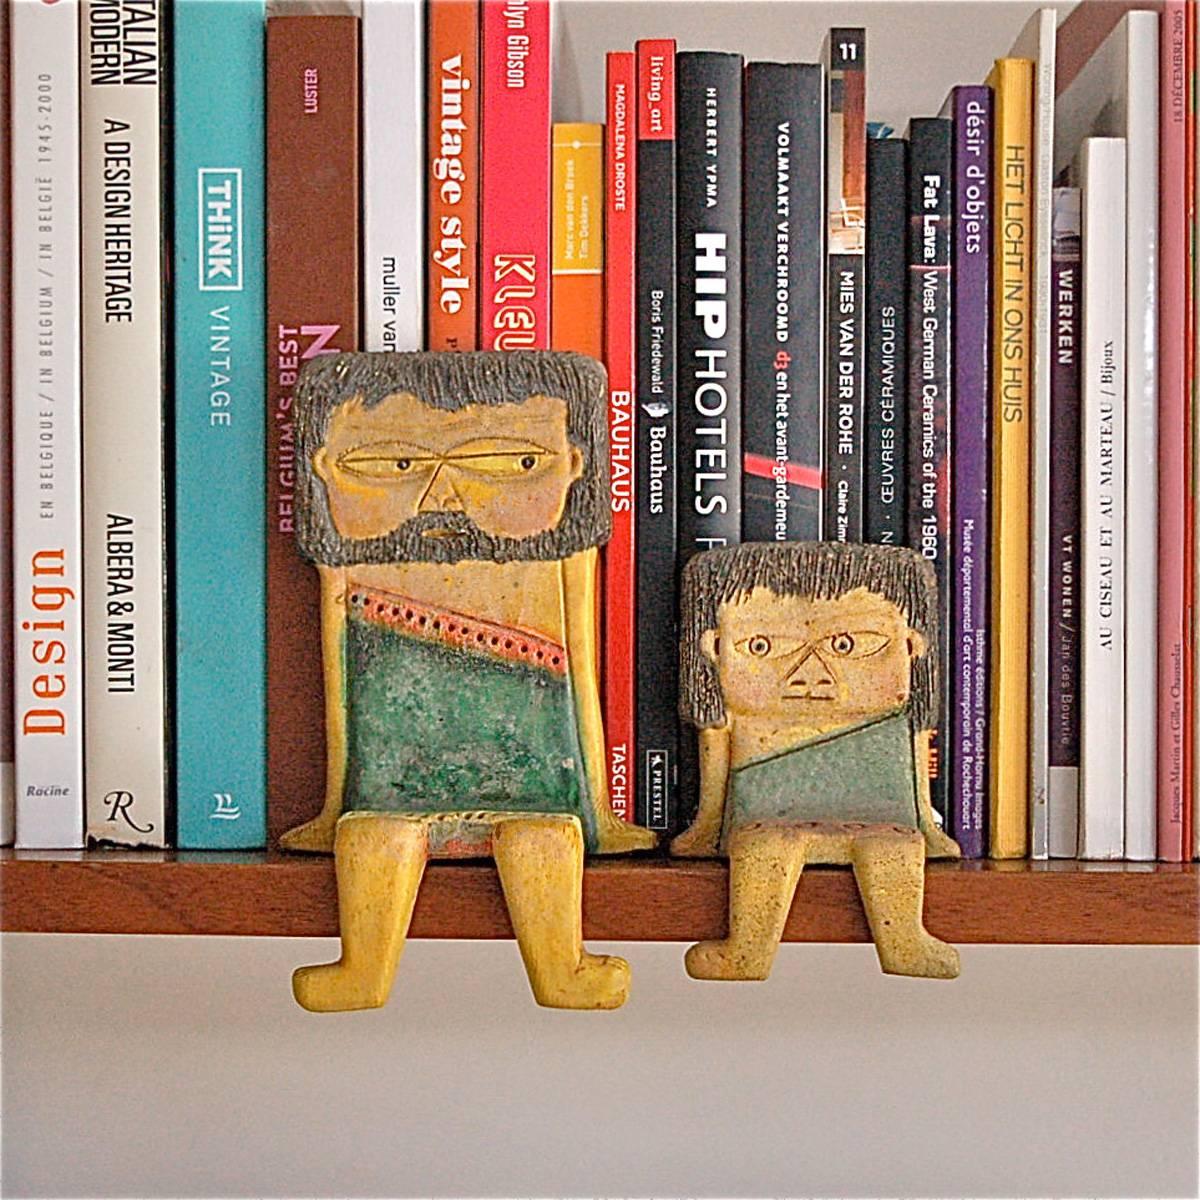 Pair of ceramic figures, depicting a caveman and child, designed to 'sit' on the edge of a shelf. This particular child figurine is very rare. Designed and signed by Italian ceramicist, Marcello Fantoni for Raymor. 

Shipping cost quoted is via